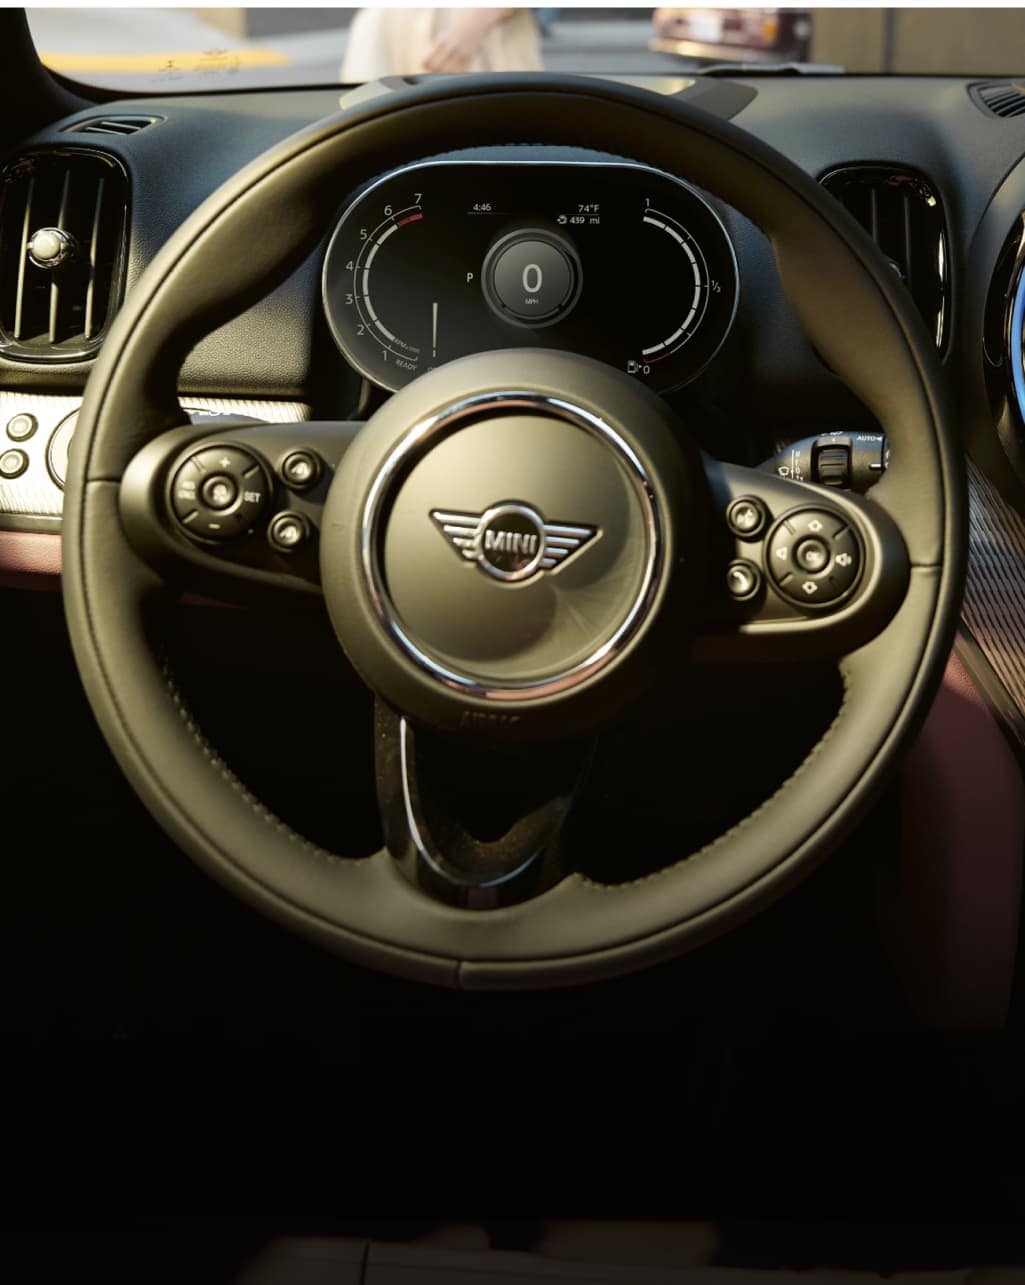 Closeup view of the multifunctional sport leather steering wheel in a MINI Countryman.